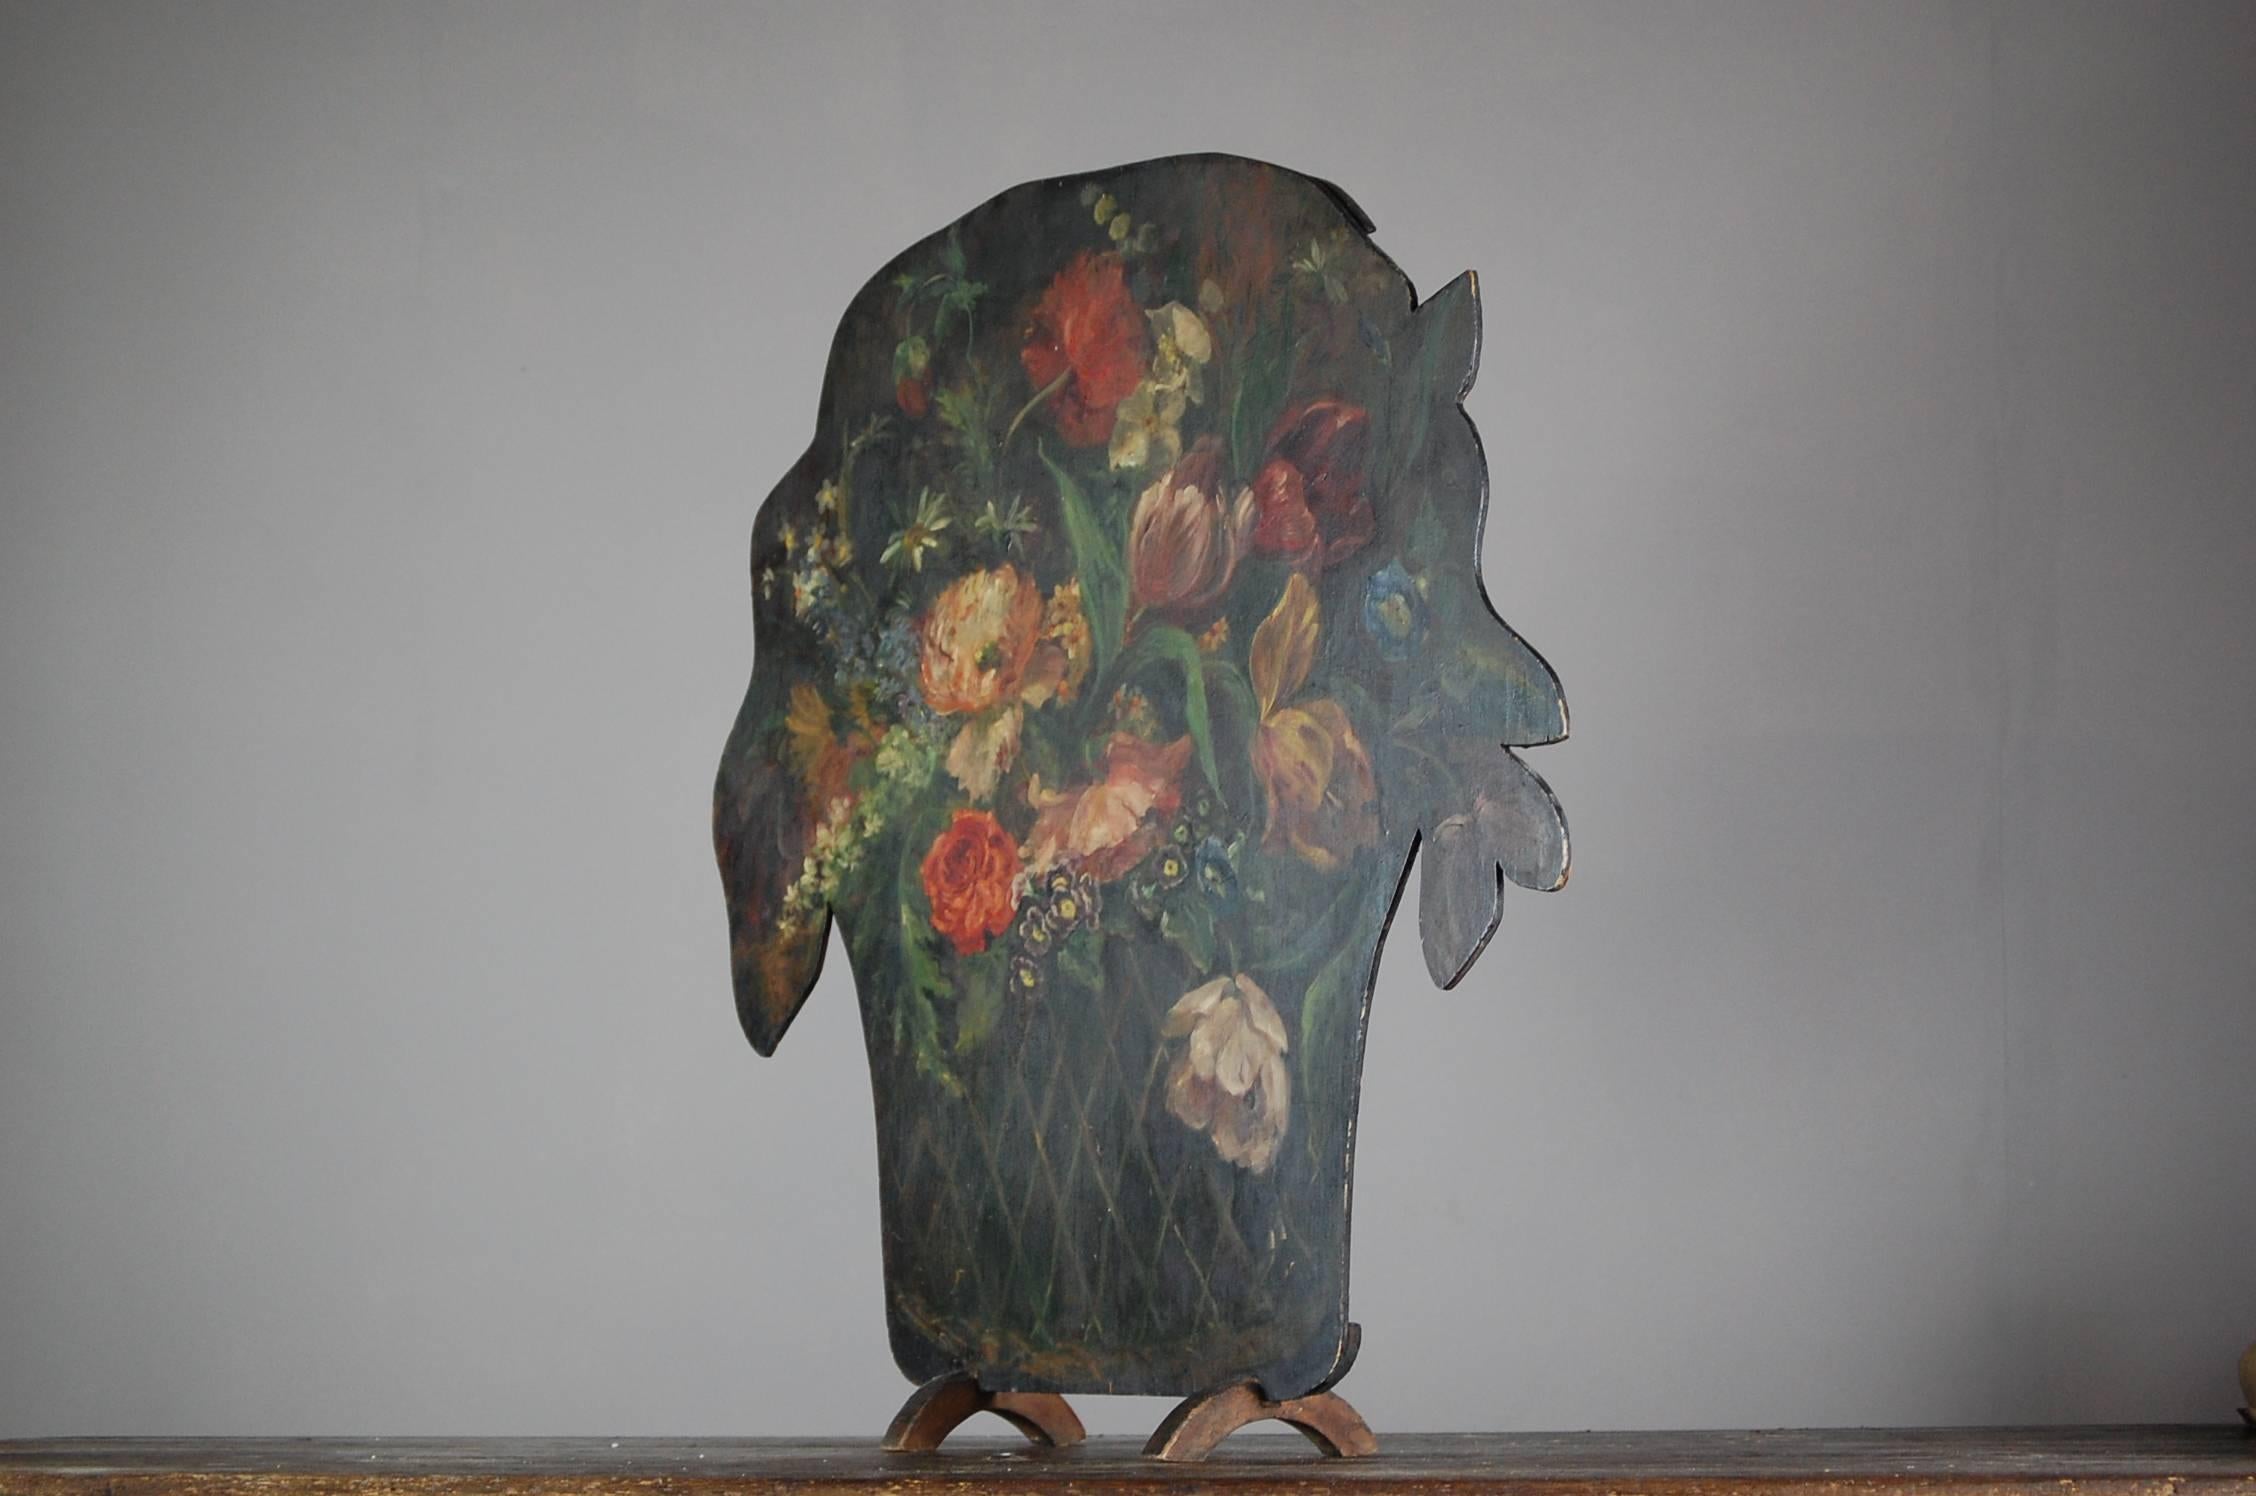 Edwardian English Dummy Board in the form of a weaved basket of flowers, painted on timber with delicate arched feet.